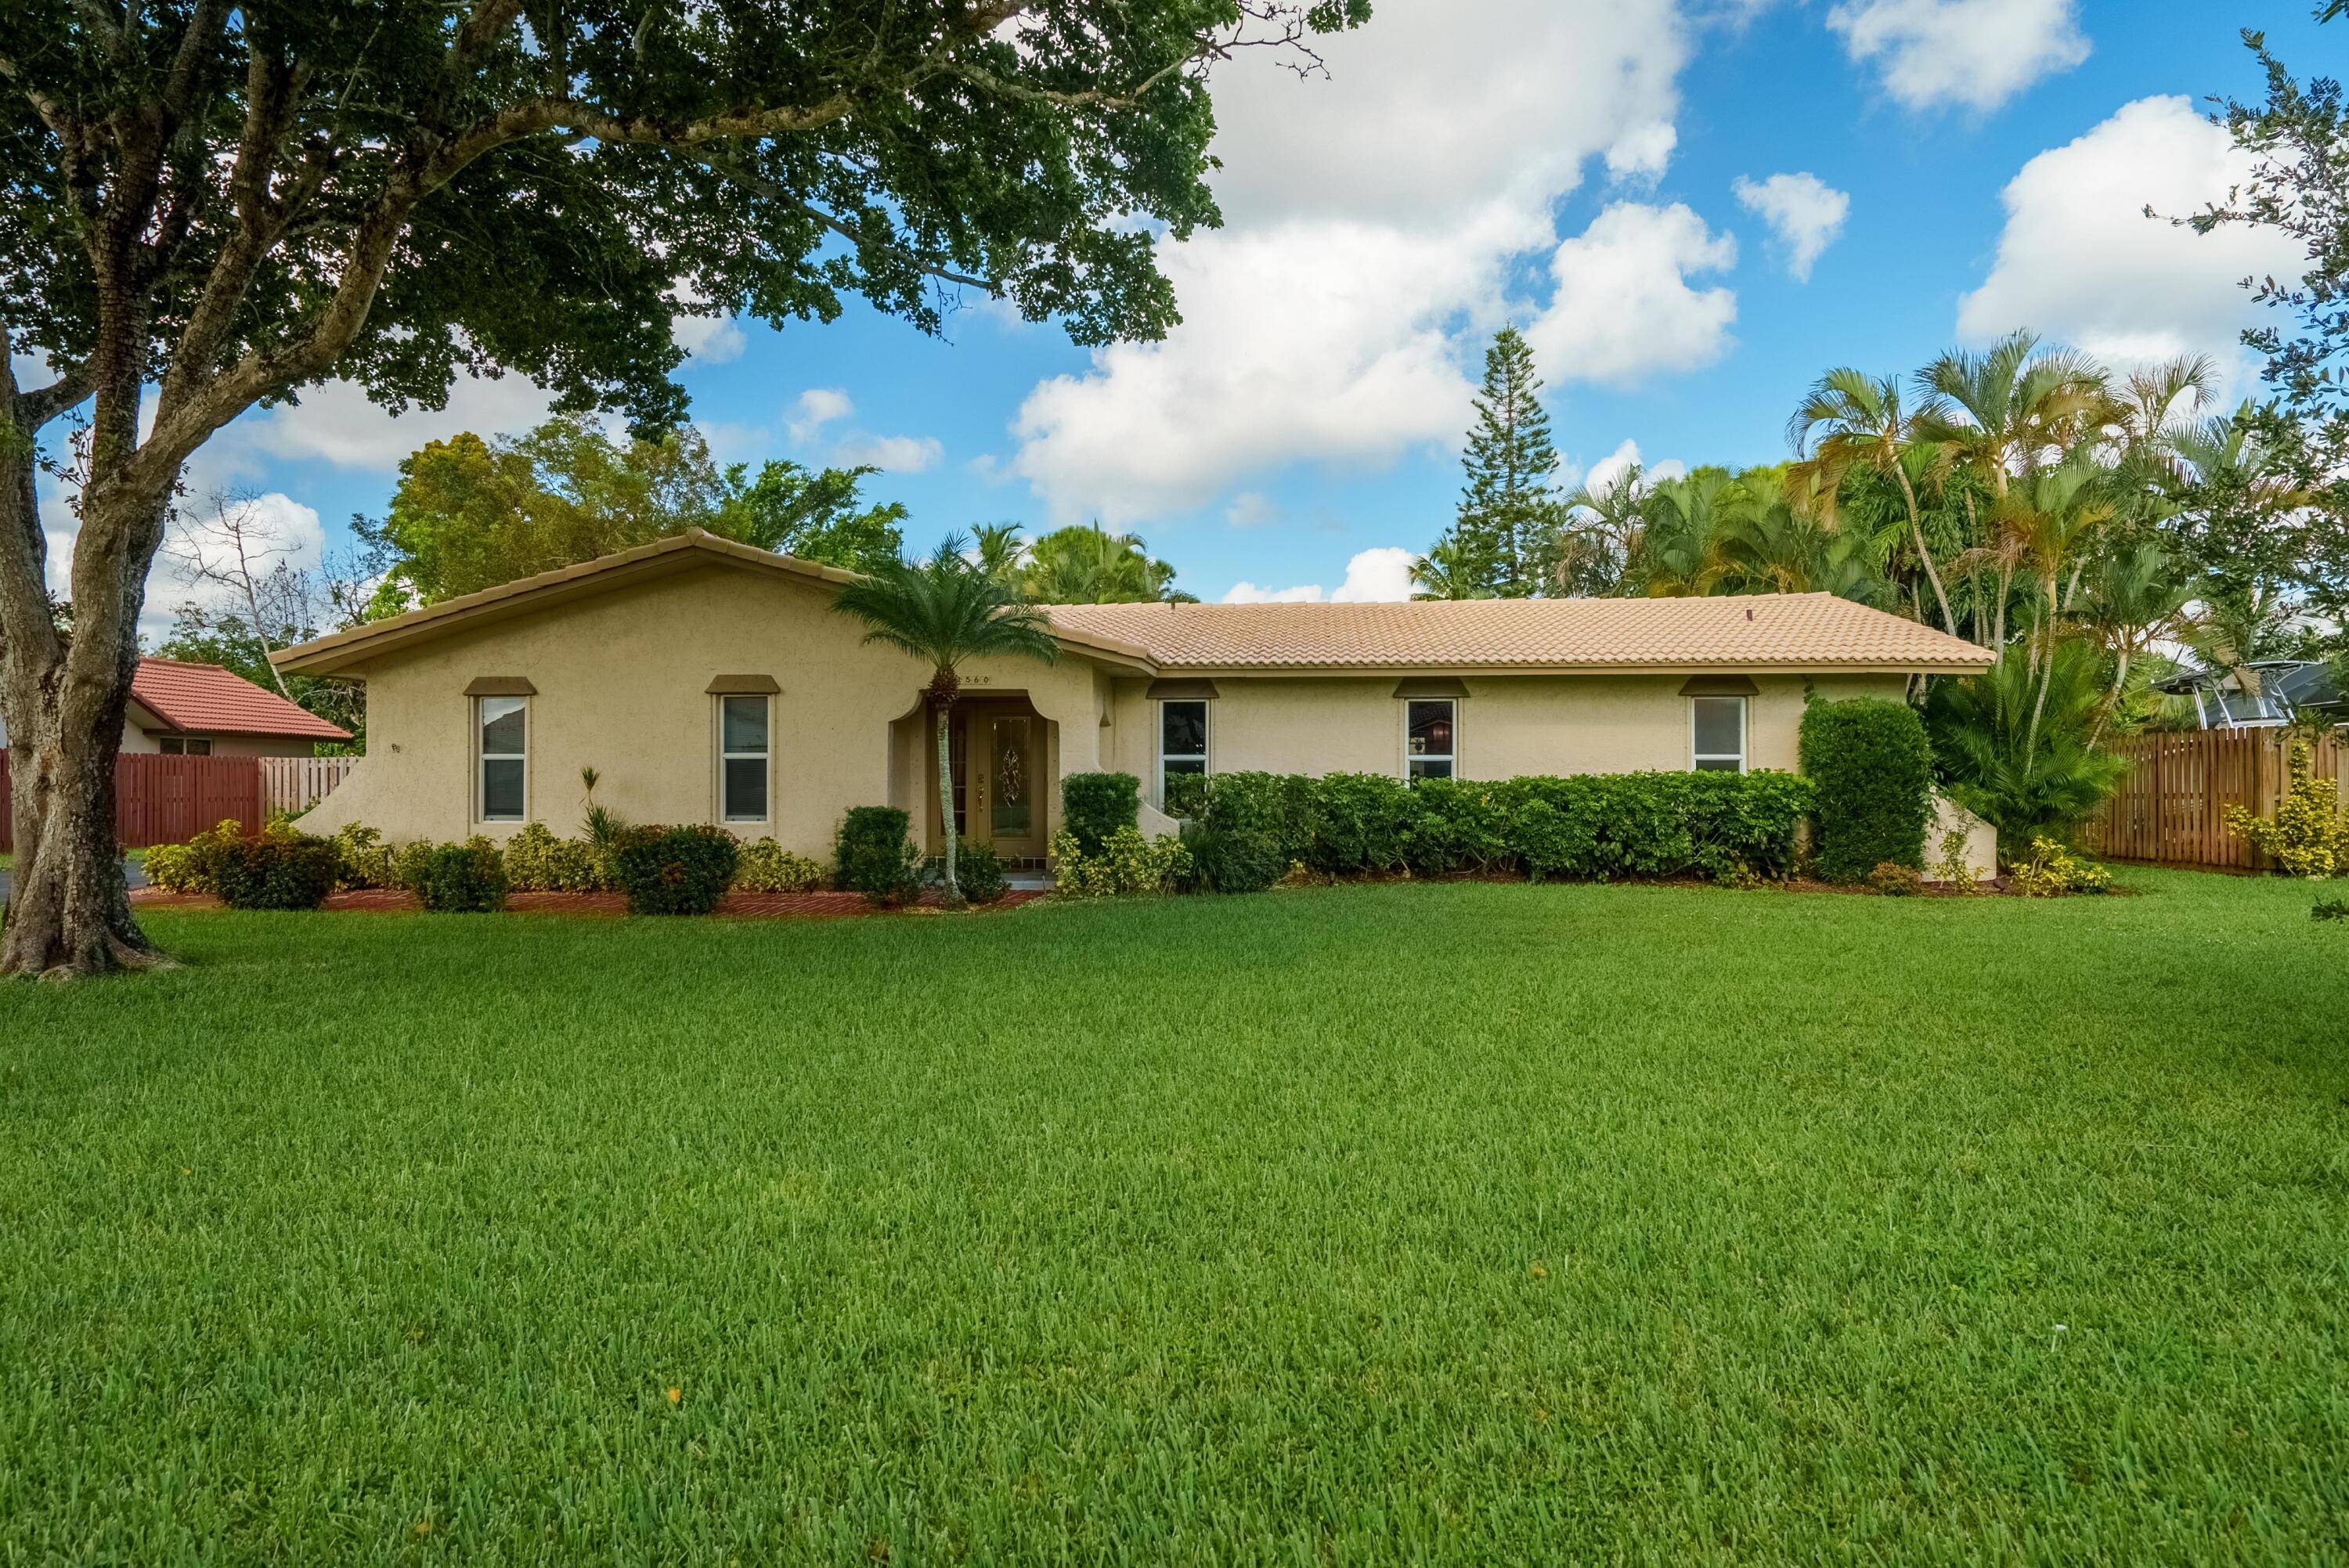 Dont miss your opportunity to purchase this beautiful 5 Bedroom 3 Bathroom Pool Home with No HOA, Tons of Parking and Room for a Boat or RV, located in the ...